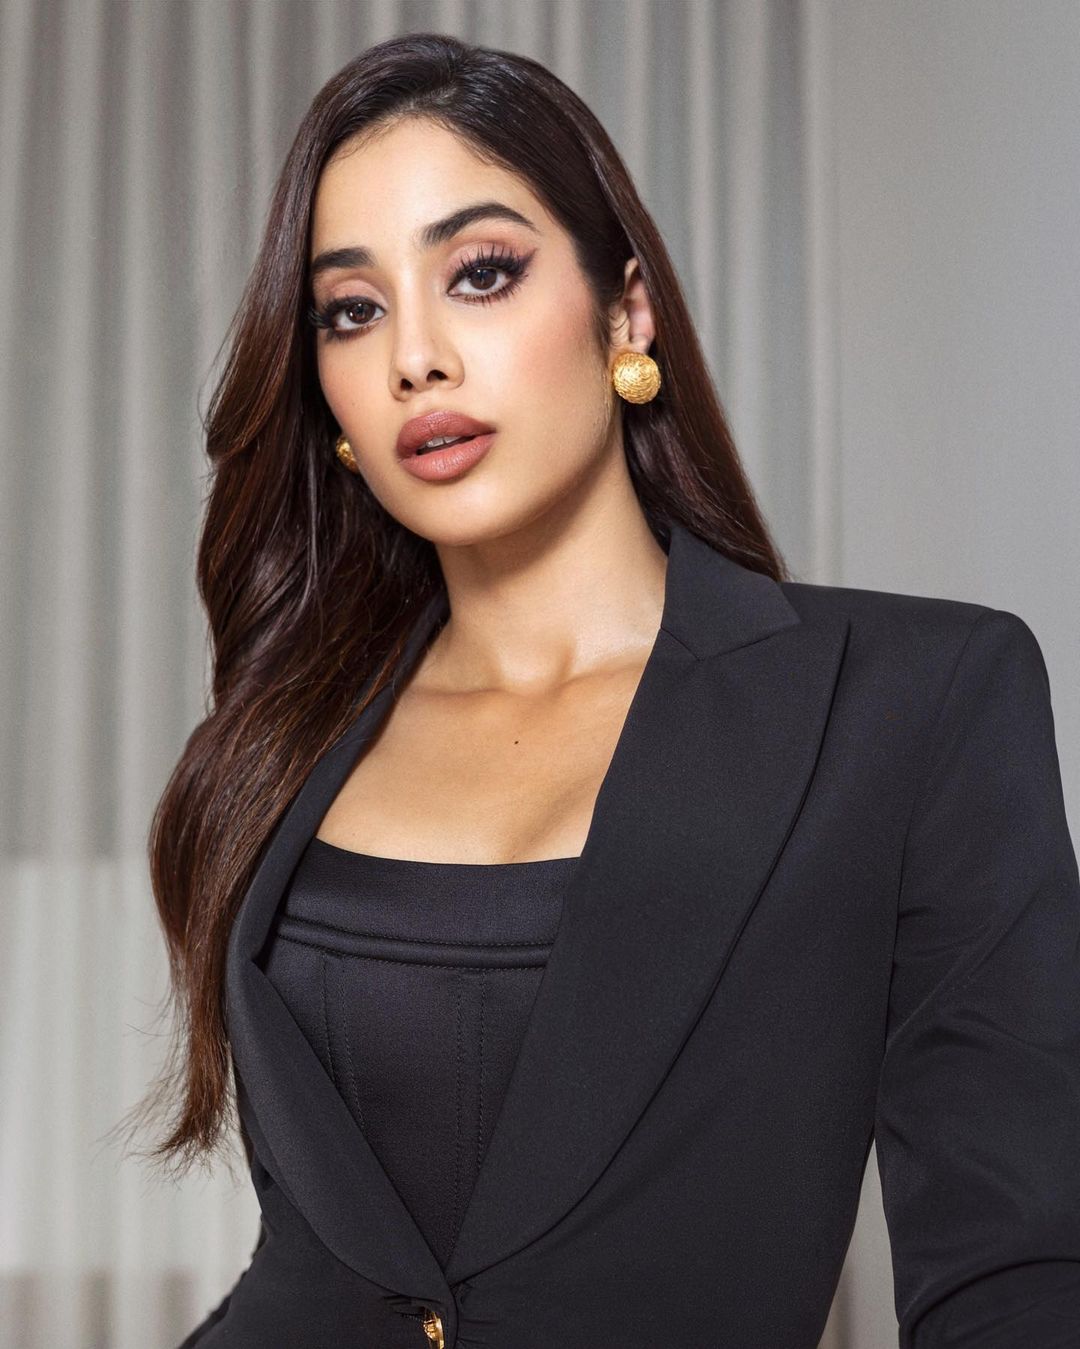 For NTR 30 Launch With Muted Contouring And Wispy Lashes, Janhvi Kapoor's  Neutral Glam Makeup Tops The Beauty Charts